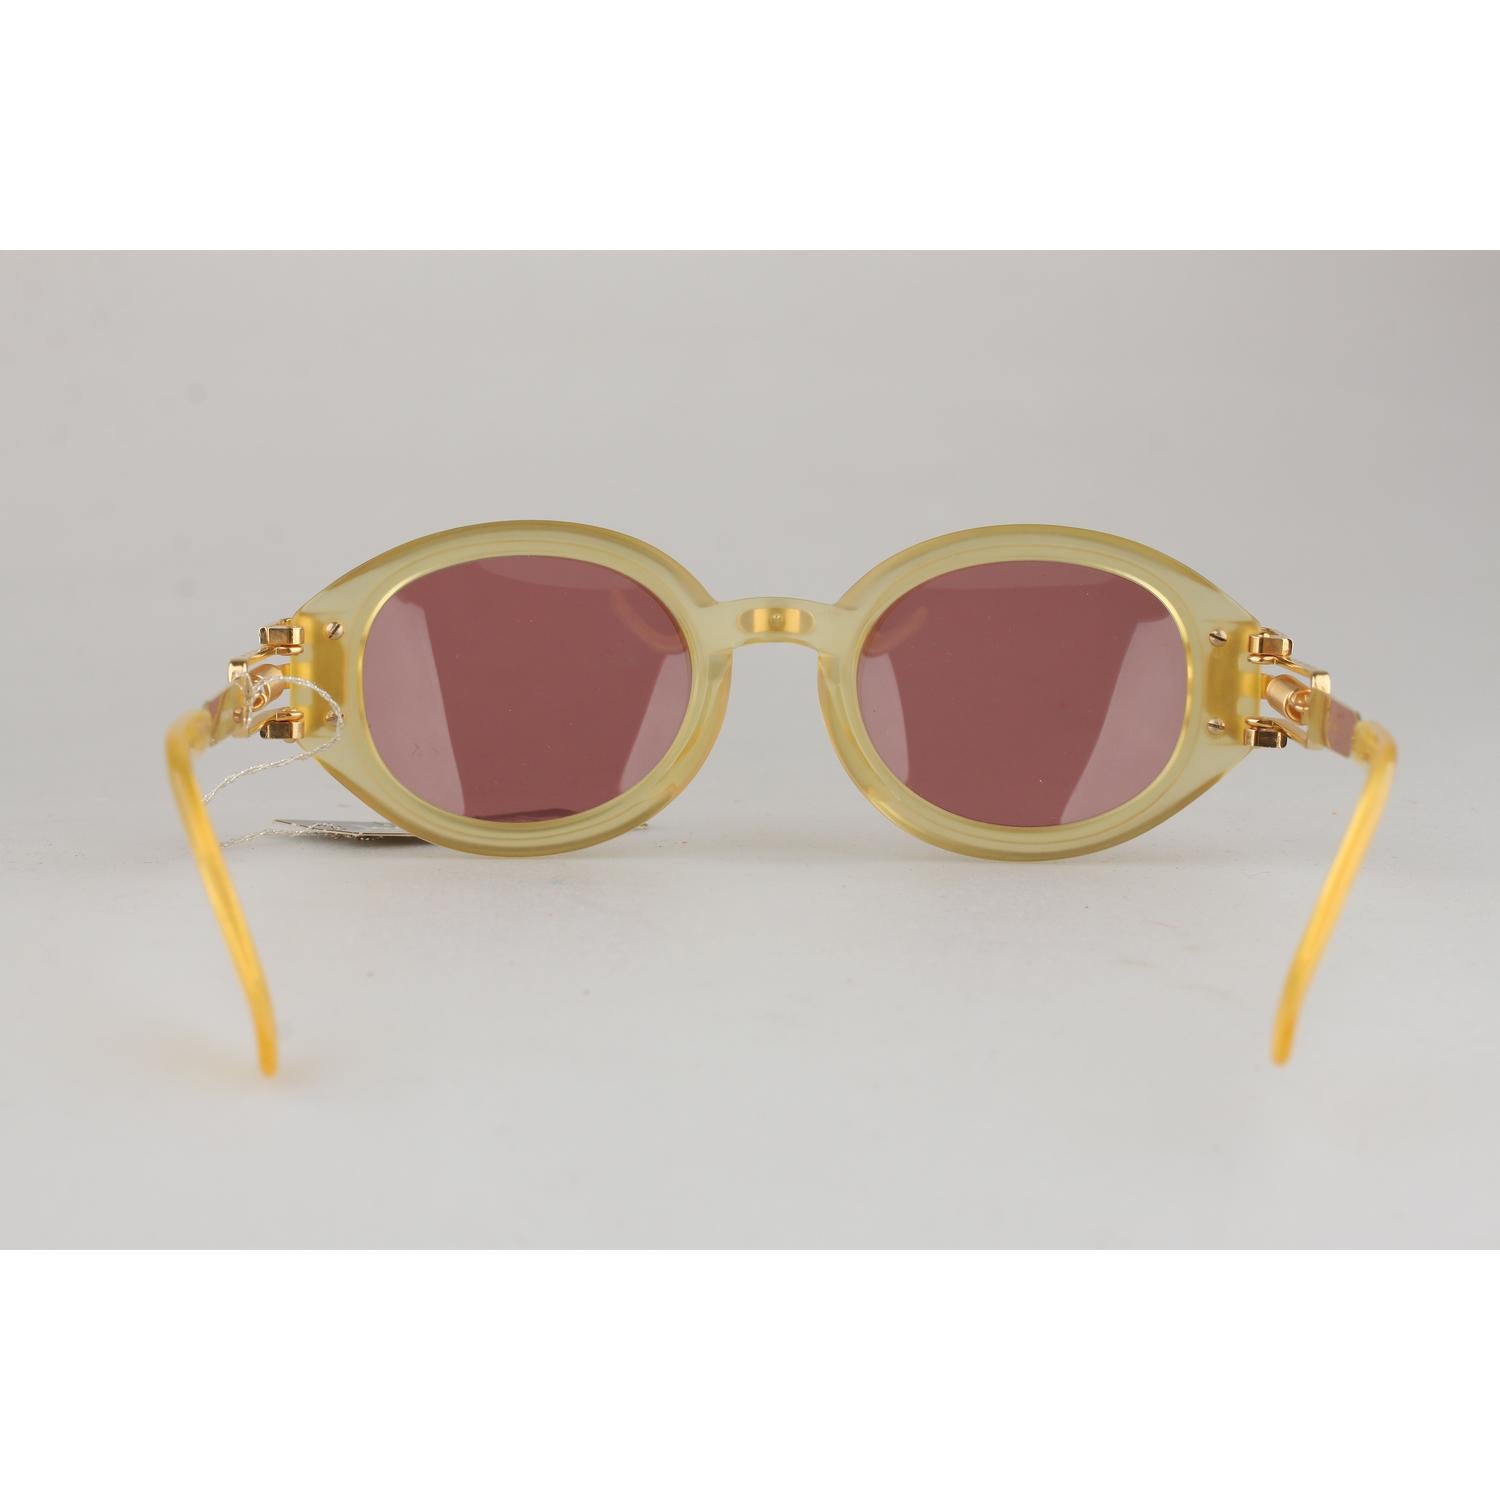 Women's or Men's Jean Paul Gaultier Vintage Gold Oval Sunglasses 56-5203 New Old Stock